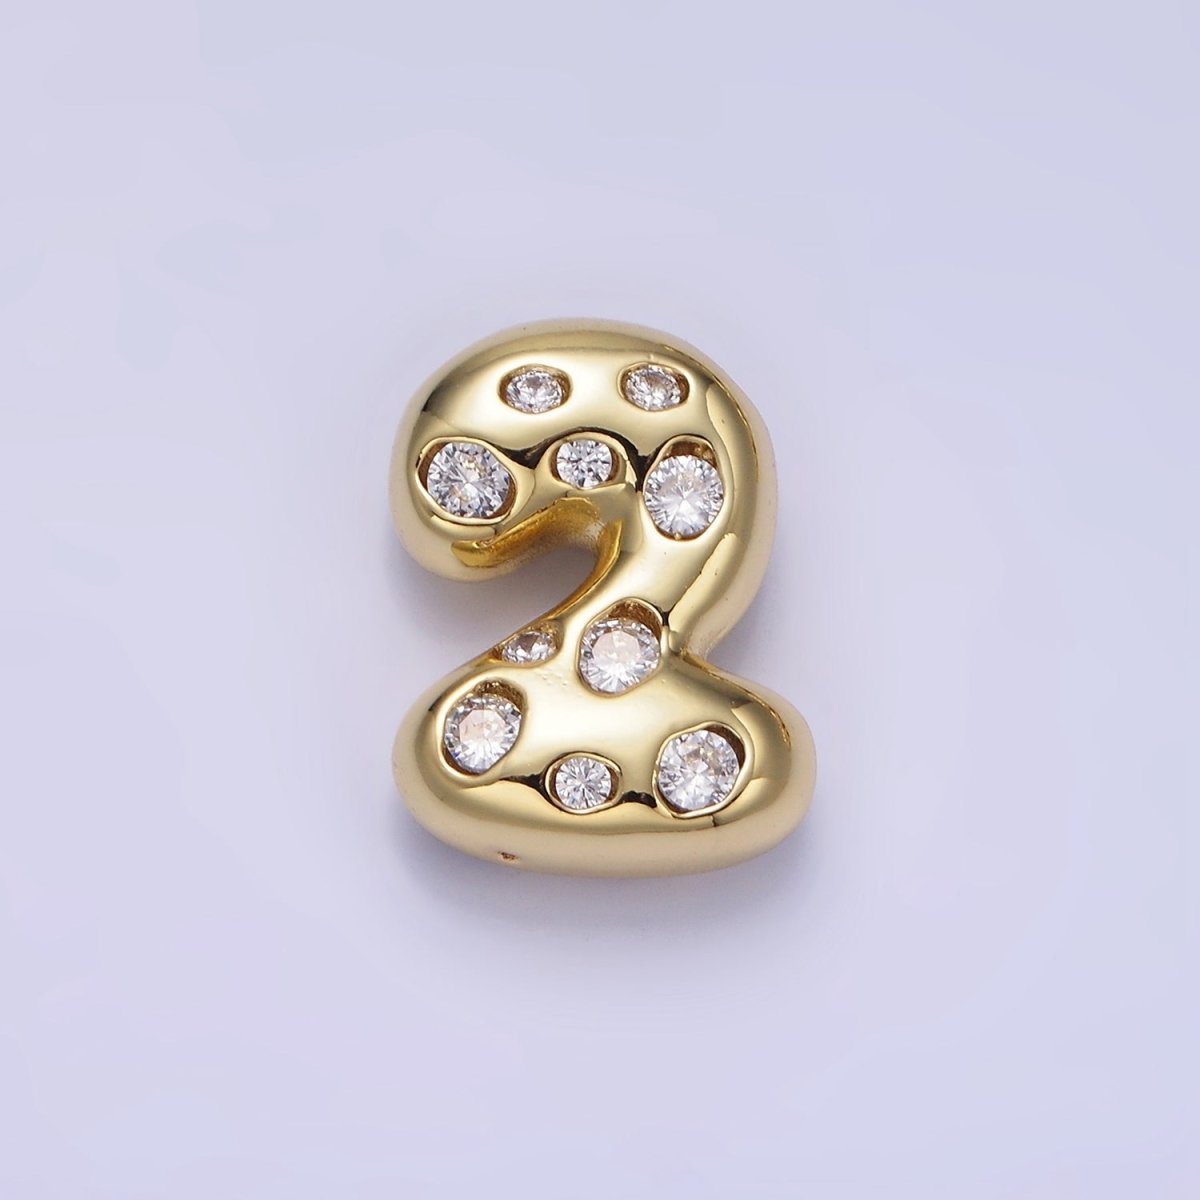 14K Gold Filled 20mm Clear CZ Chubby Balloon Number Numerical Pendant | AG775 - AG779 - DLUXCA